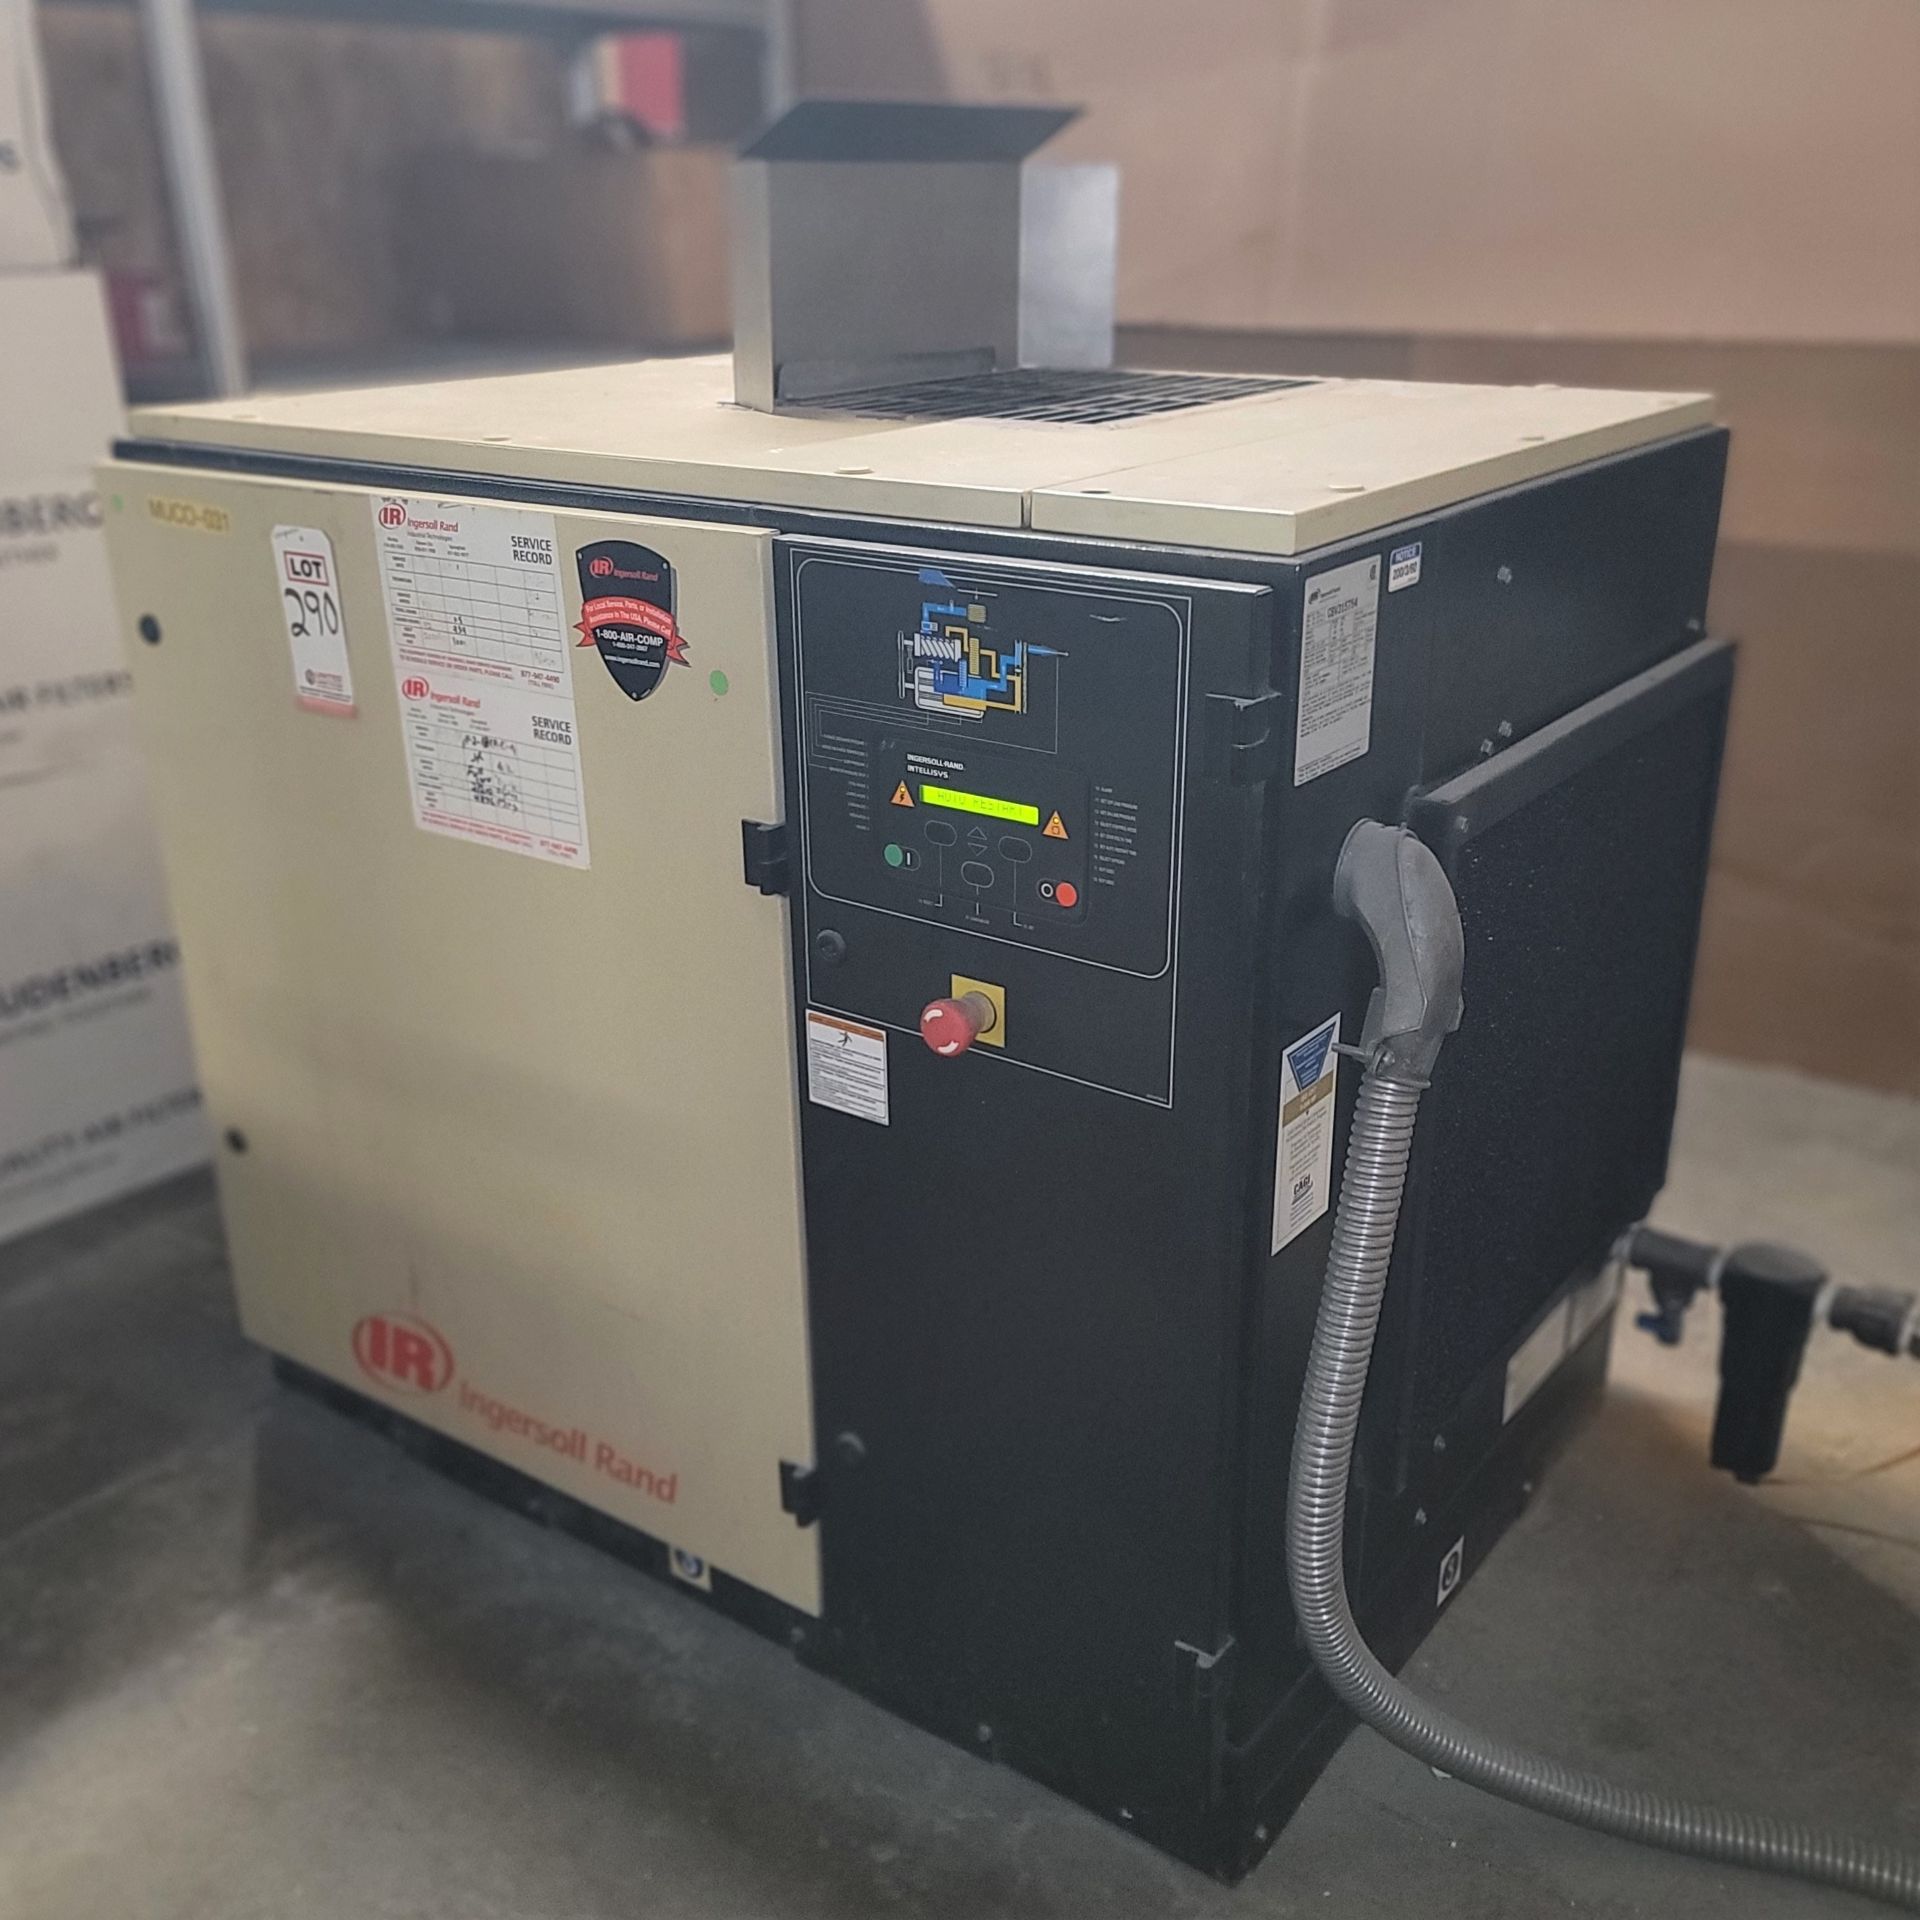 INGERSOLL RAND ROTARY SCREW AIR COMPRESSOR, MODEL SSR UP6-30-150, 30 HP, 150 PSI, S/N CBV315754 - Image 2 of 5